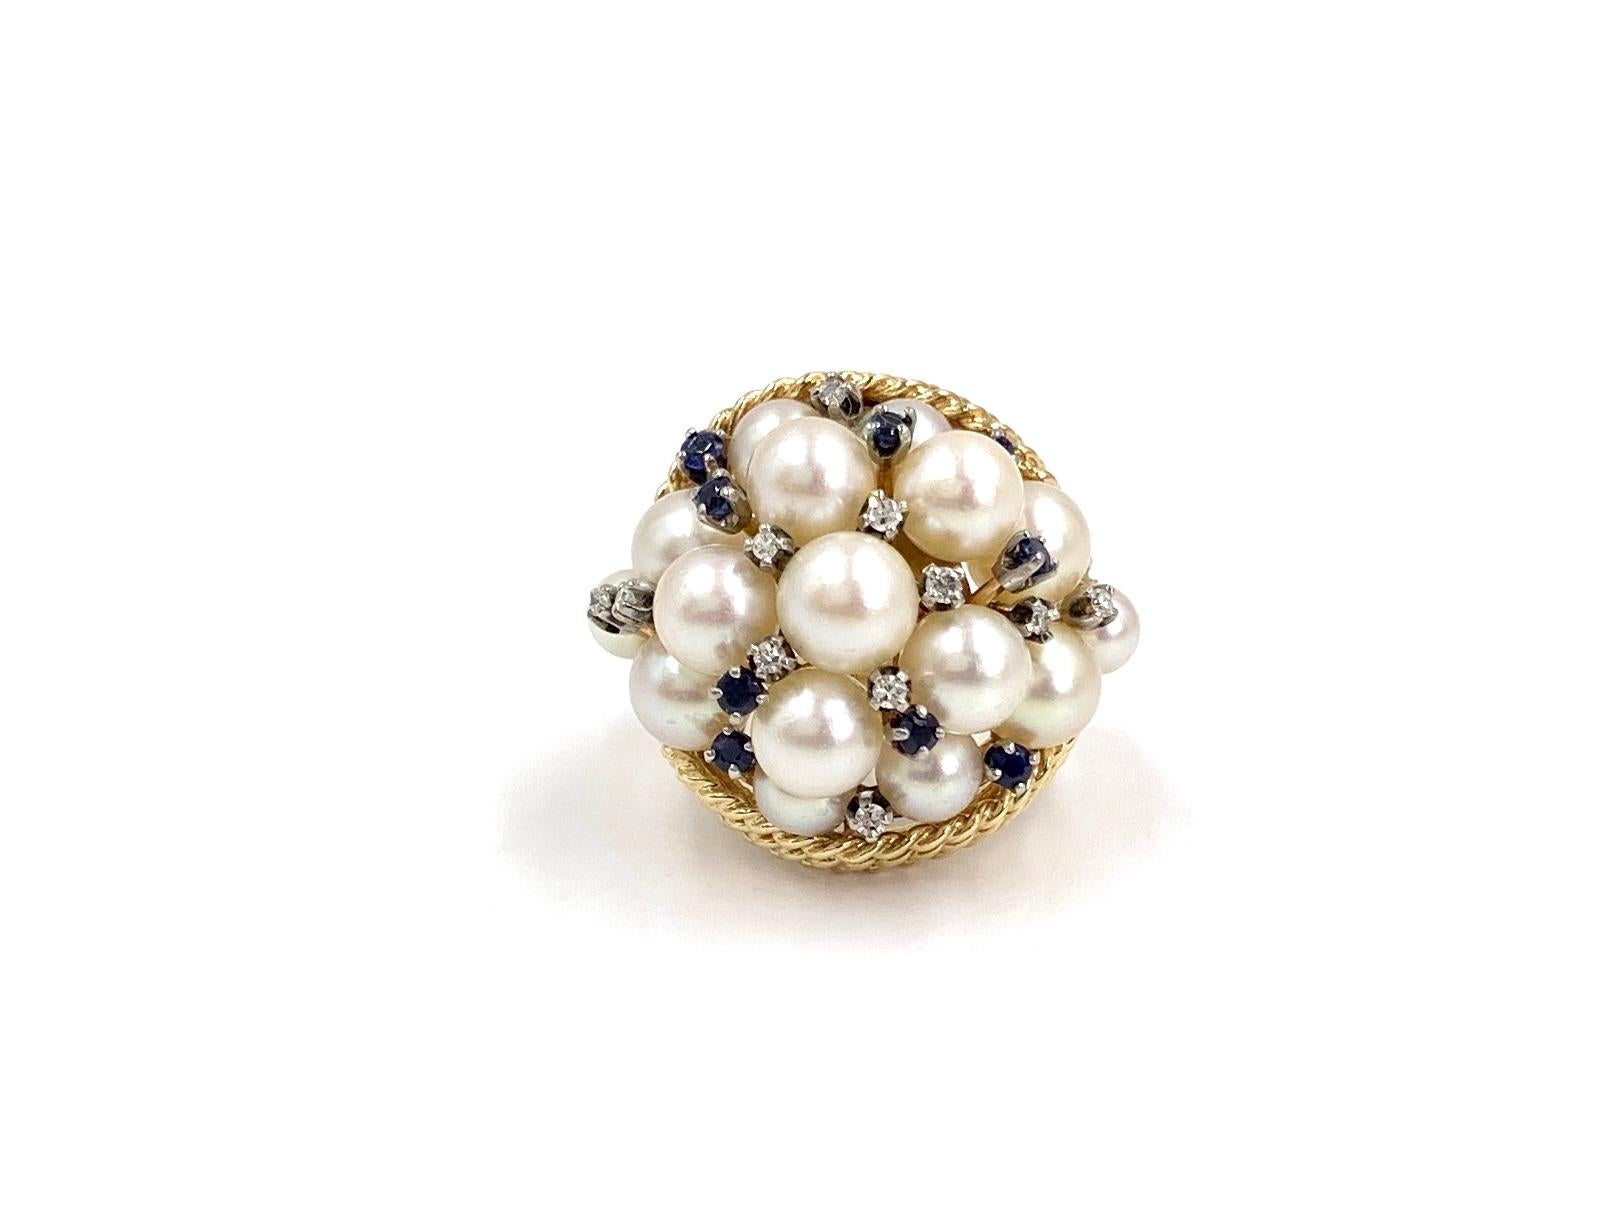 A unique statement piece made in 14 karat yellow gold featuring a domed cluster of 16 cultured round white pearls, 9 well saturated blue sapphires at approximately .20 carats total weight and 11 round diamonds at approximately .15 carats total